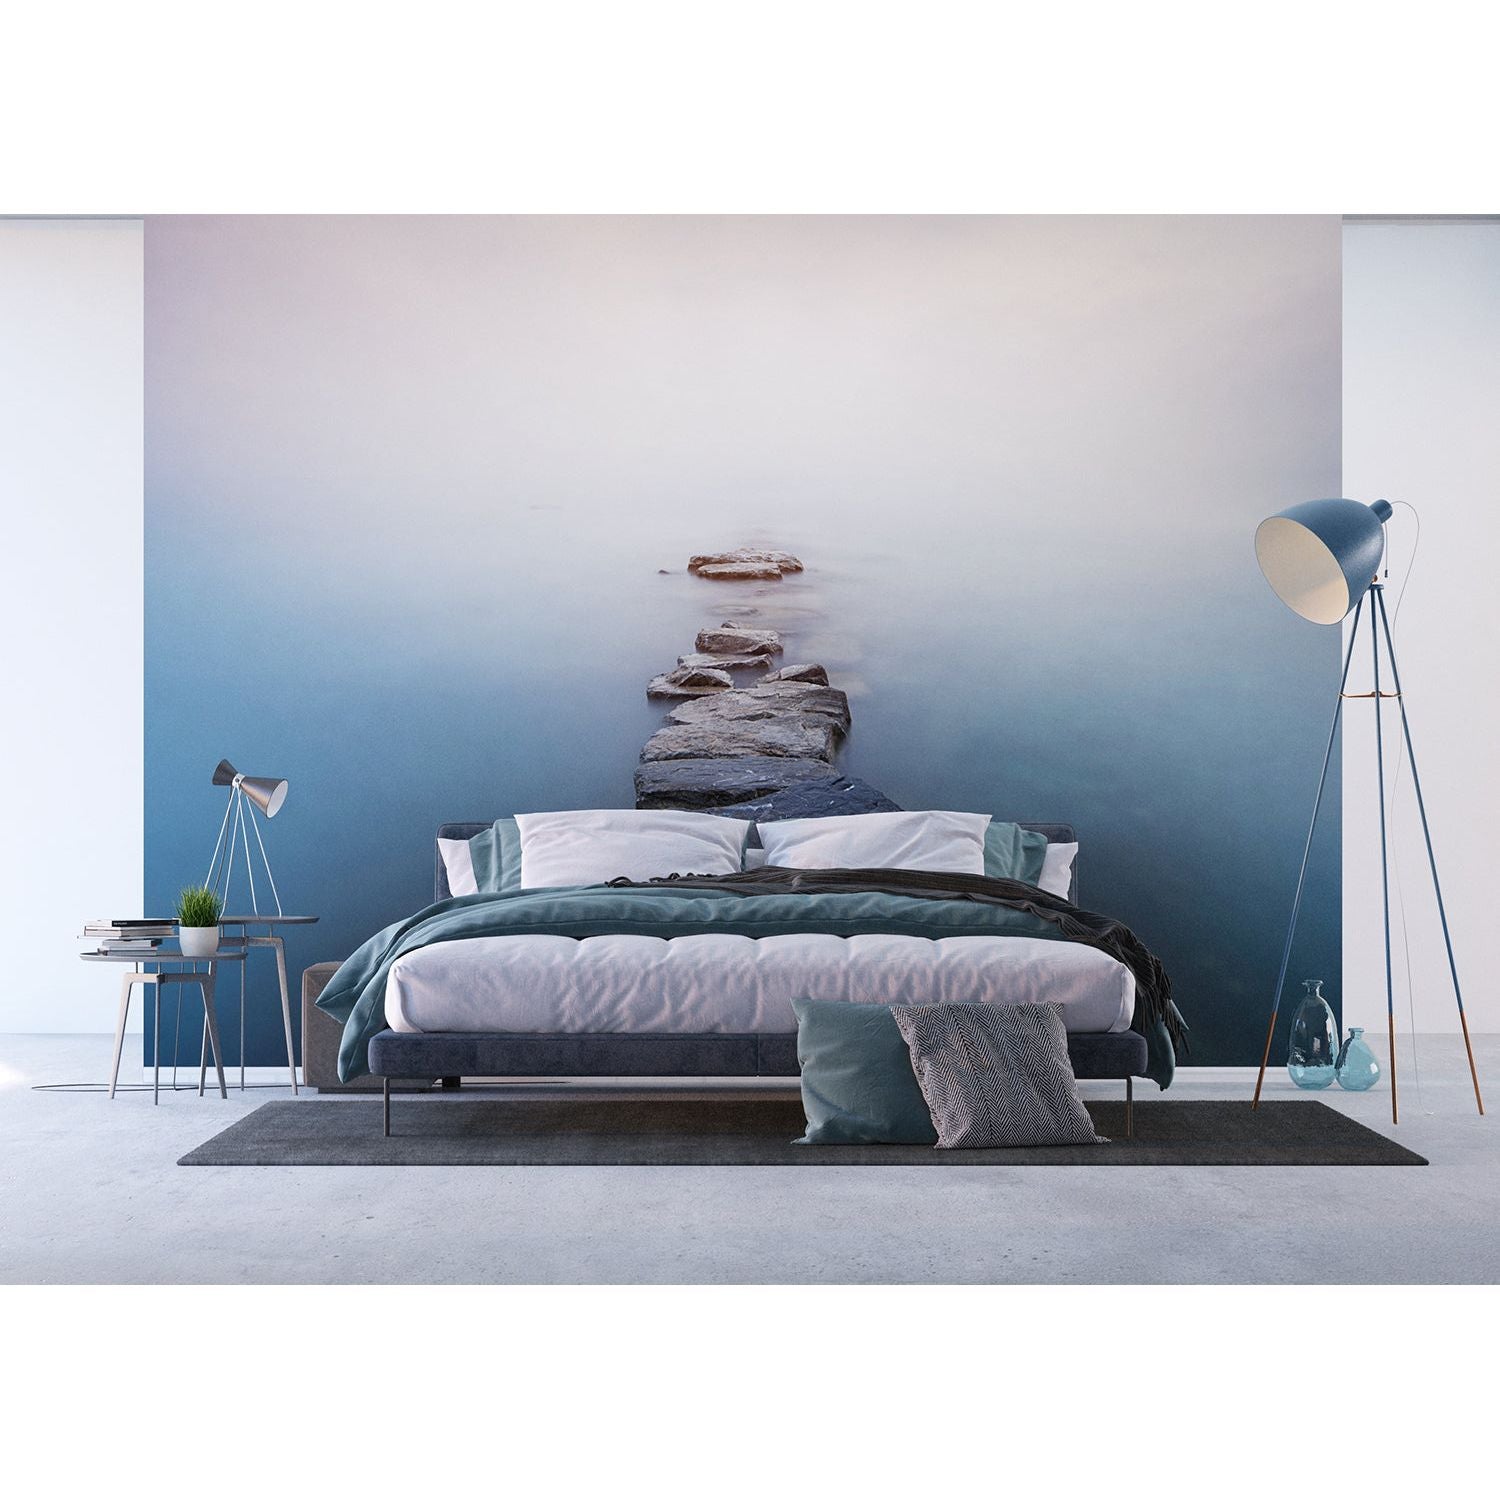 Stepping Stones to Tranquility Wall Mural